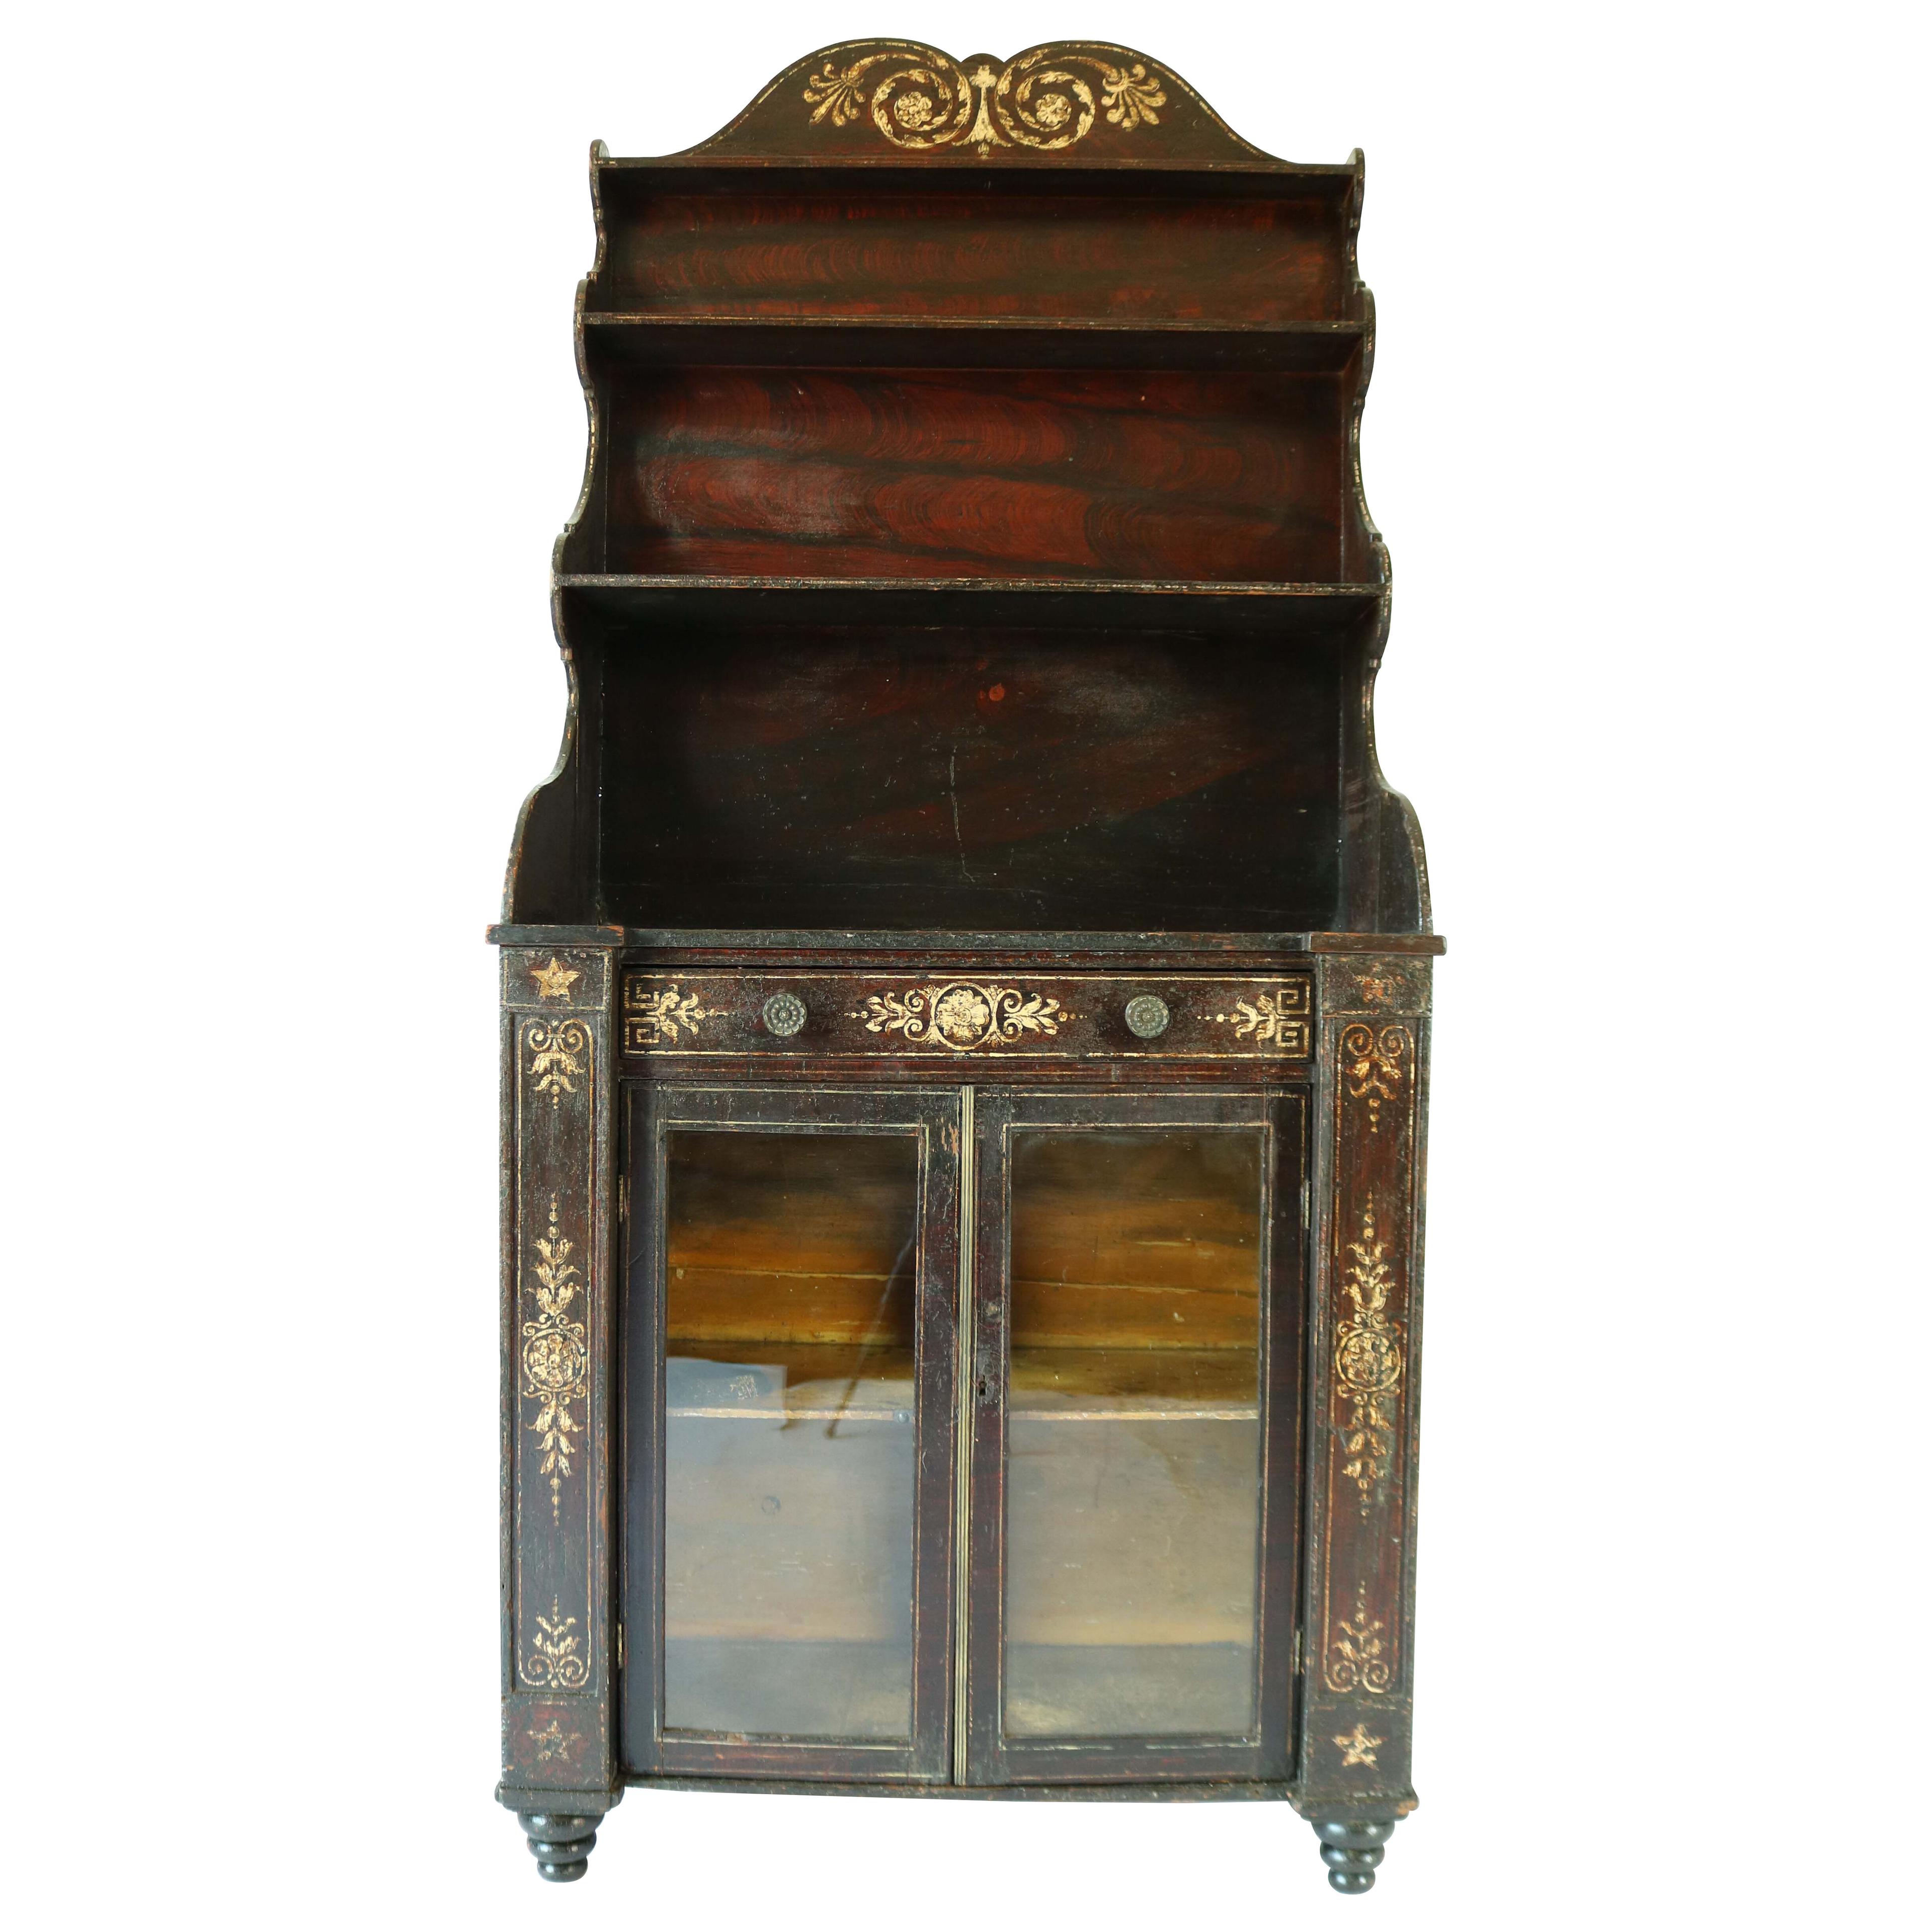 A Painted Regency Waterfall Bookcase.